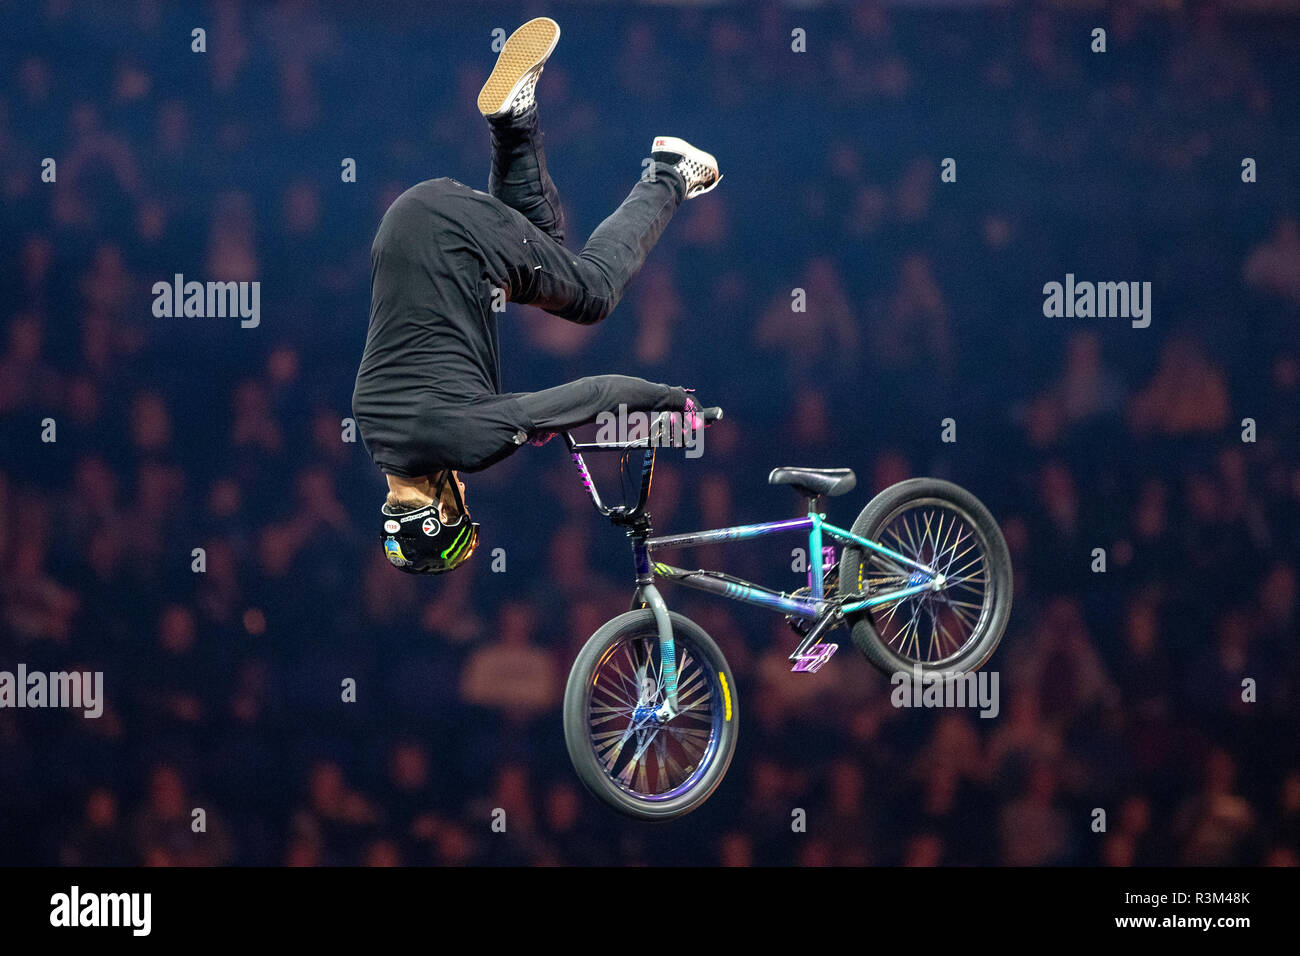 London, UK. 23rd Nov, 2018.Nitro Circus Live 2018, breathtaking  choreographed routines for FMX, BMX and Skate. Riders will execute moves  such as the Nitro Bomb and use the 40-foot Giganta ramp during